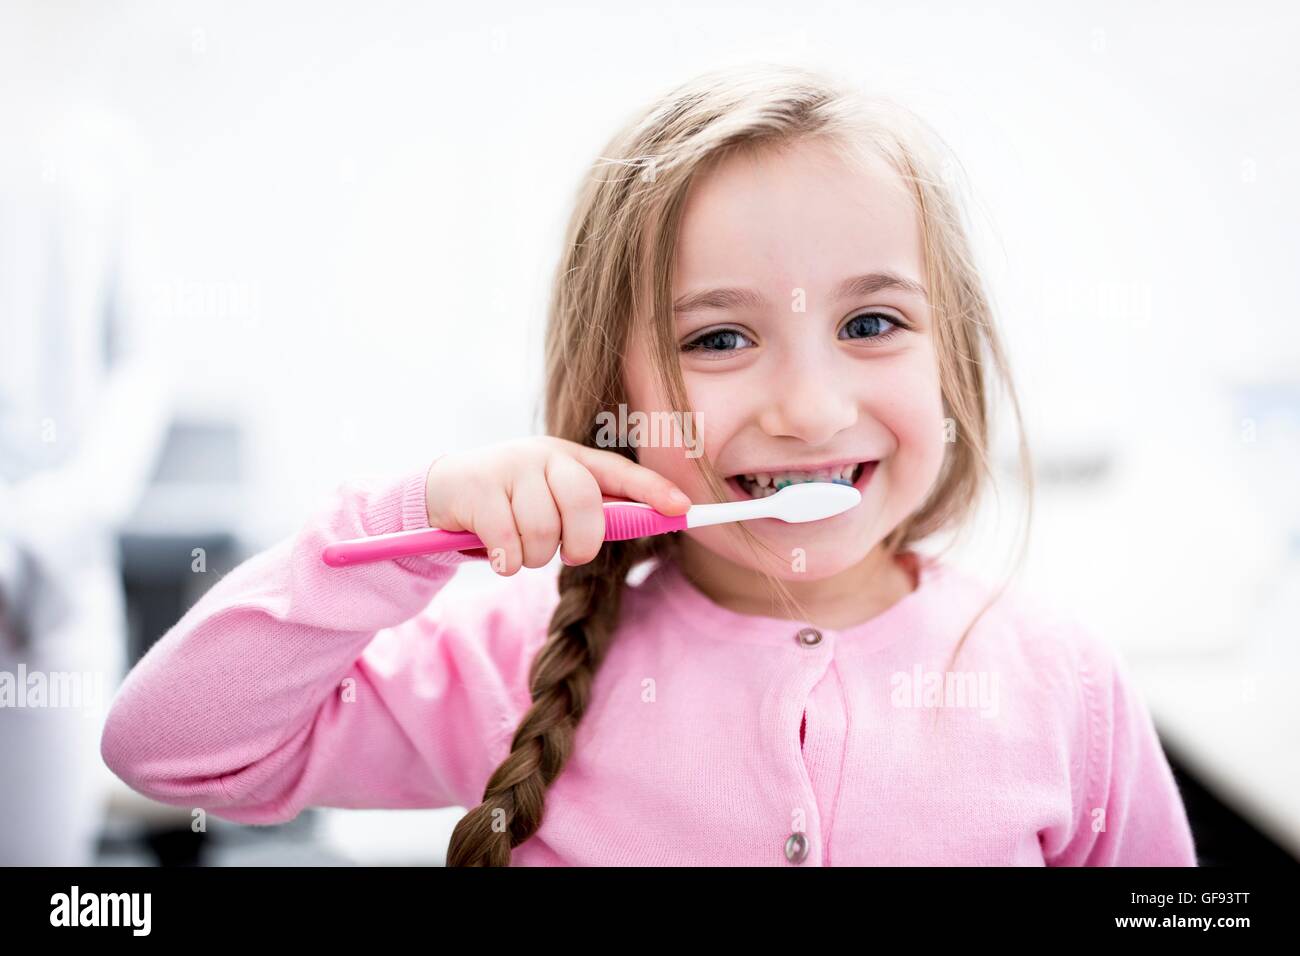 MODEL RELEASED. Girl brushing teeth, portrait, close-up. Stock Photo